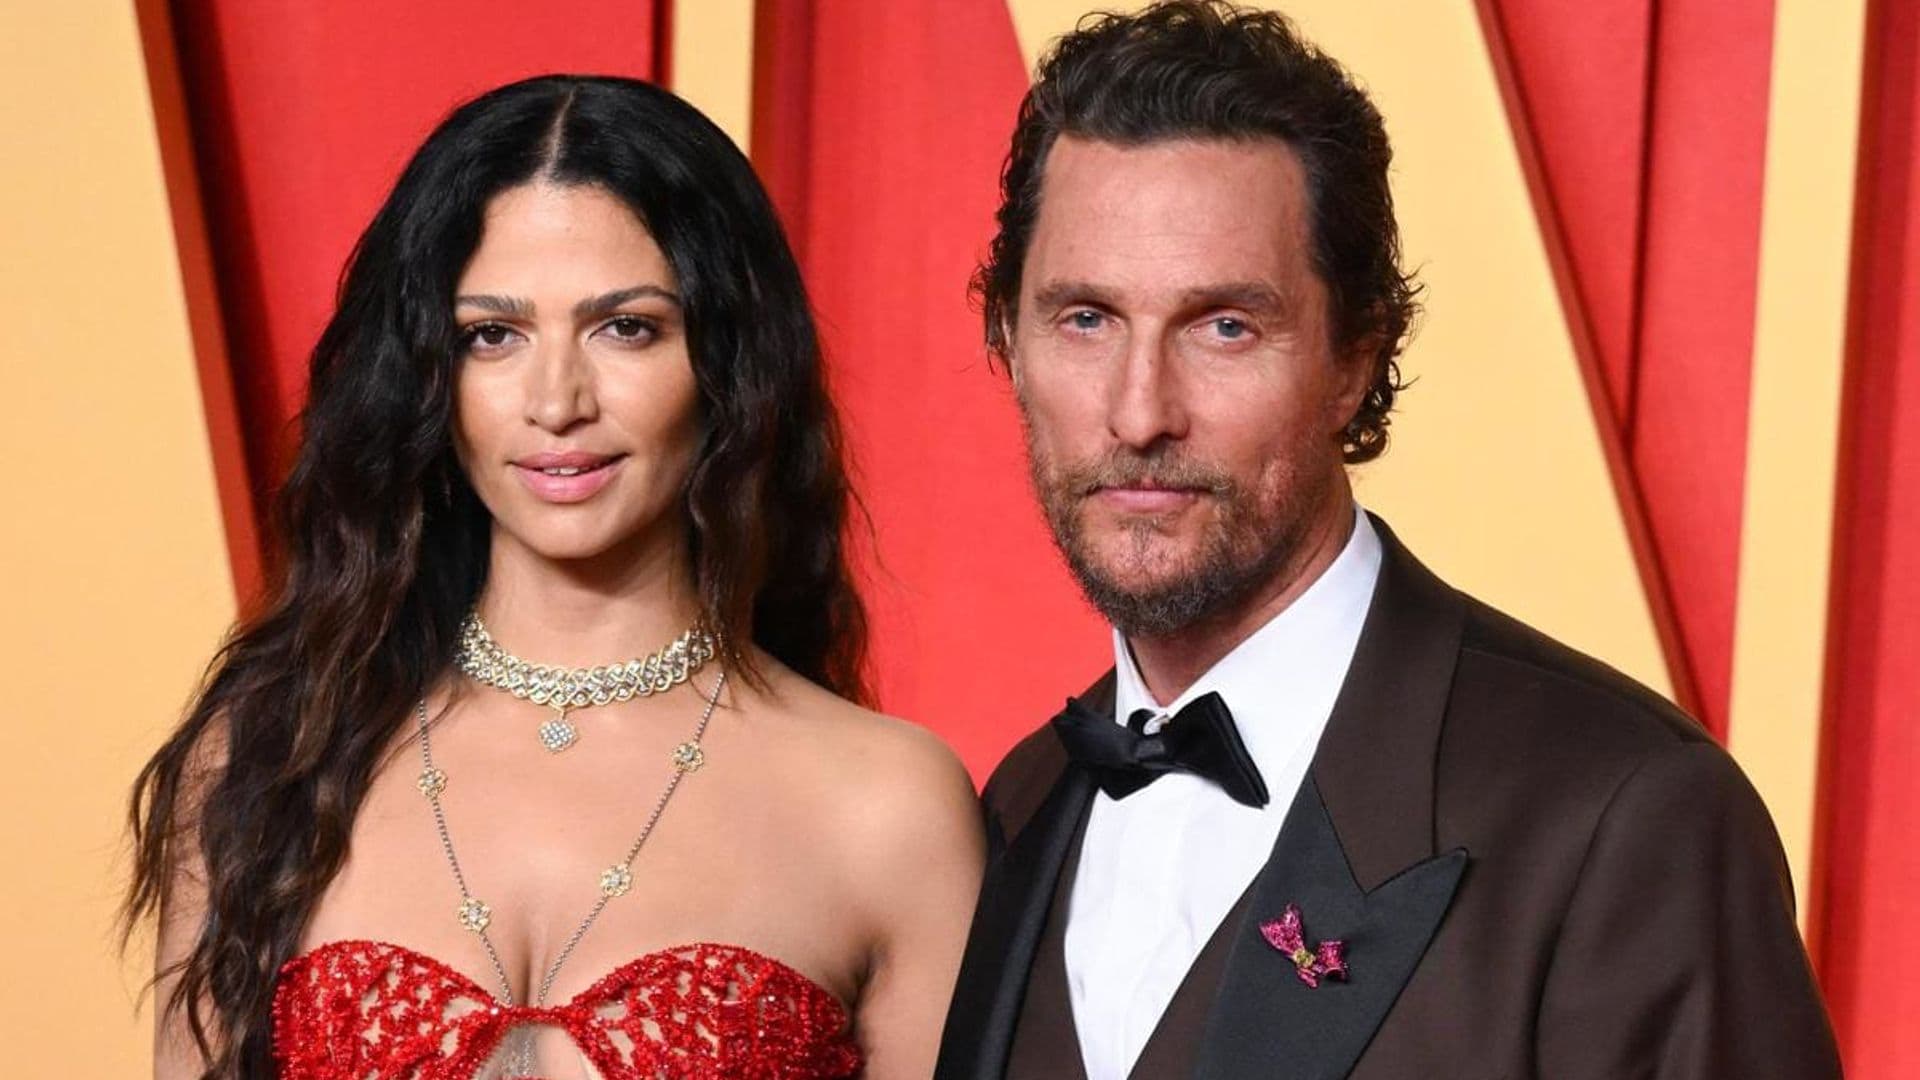 Matthew McConaughey and Camila Alves’ daughter looks just like her parents